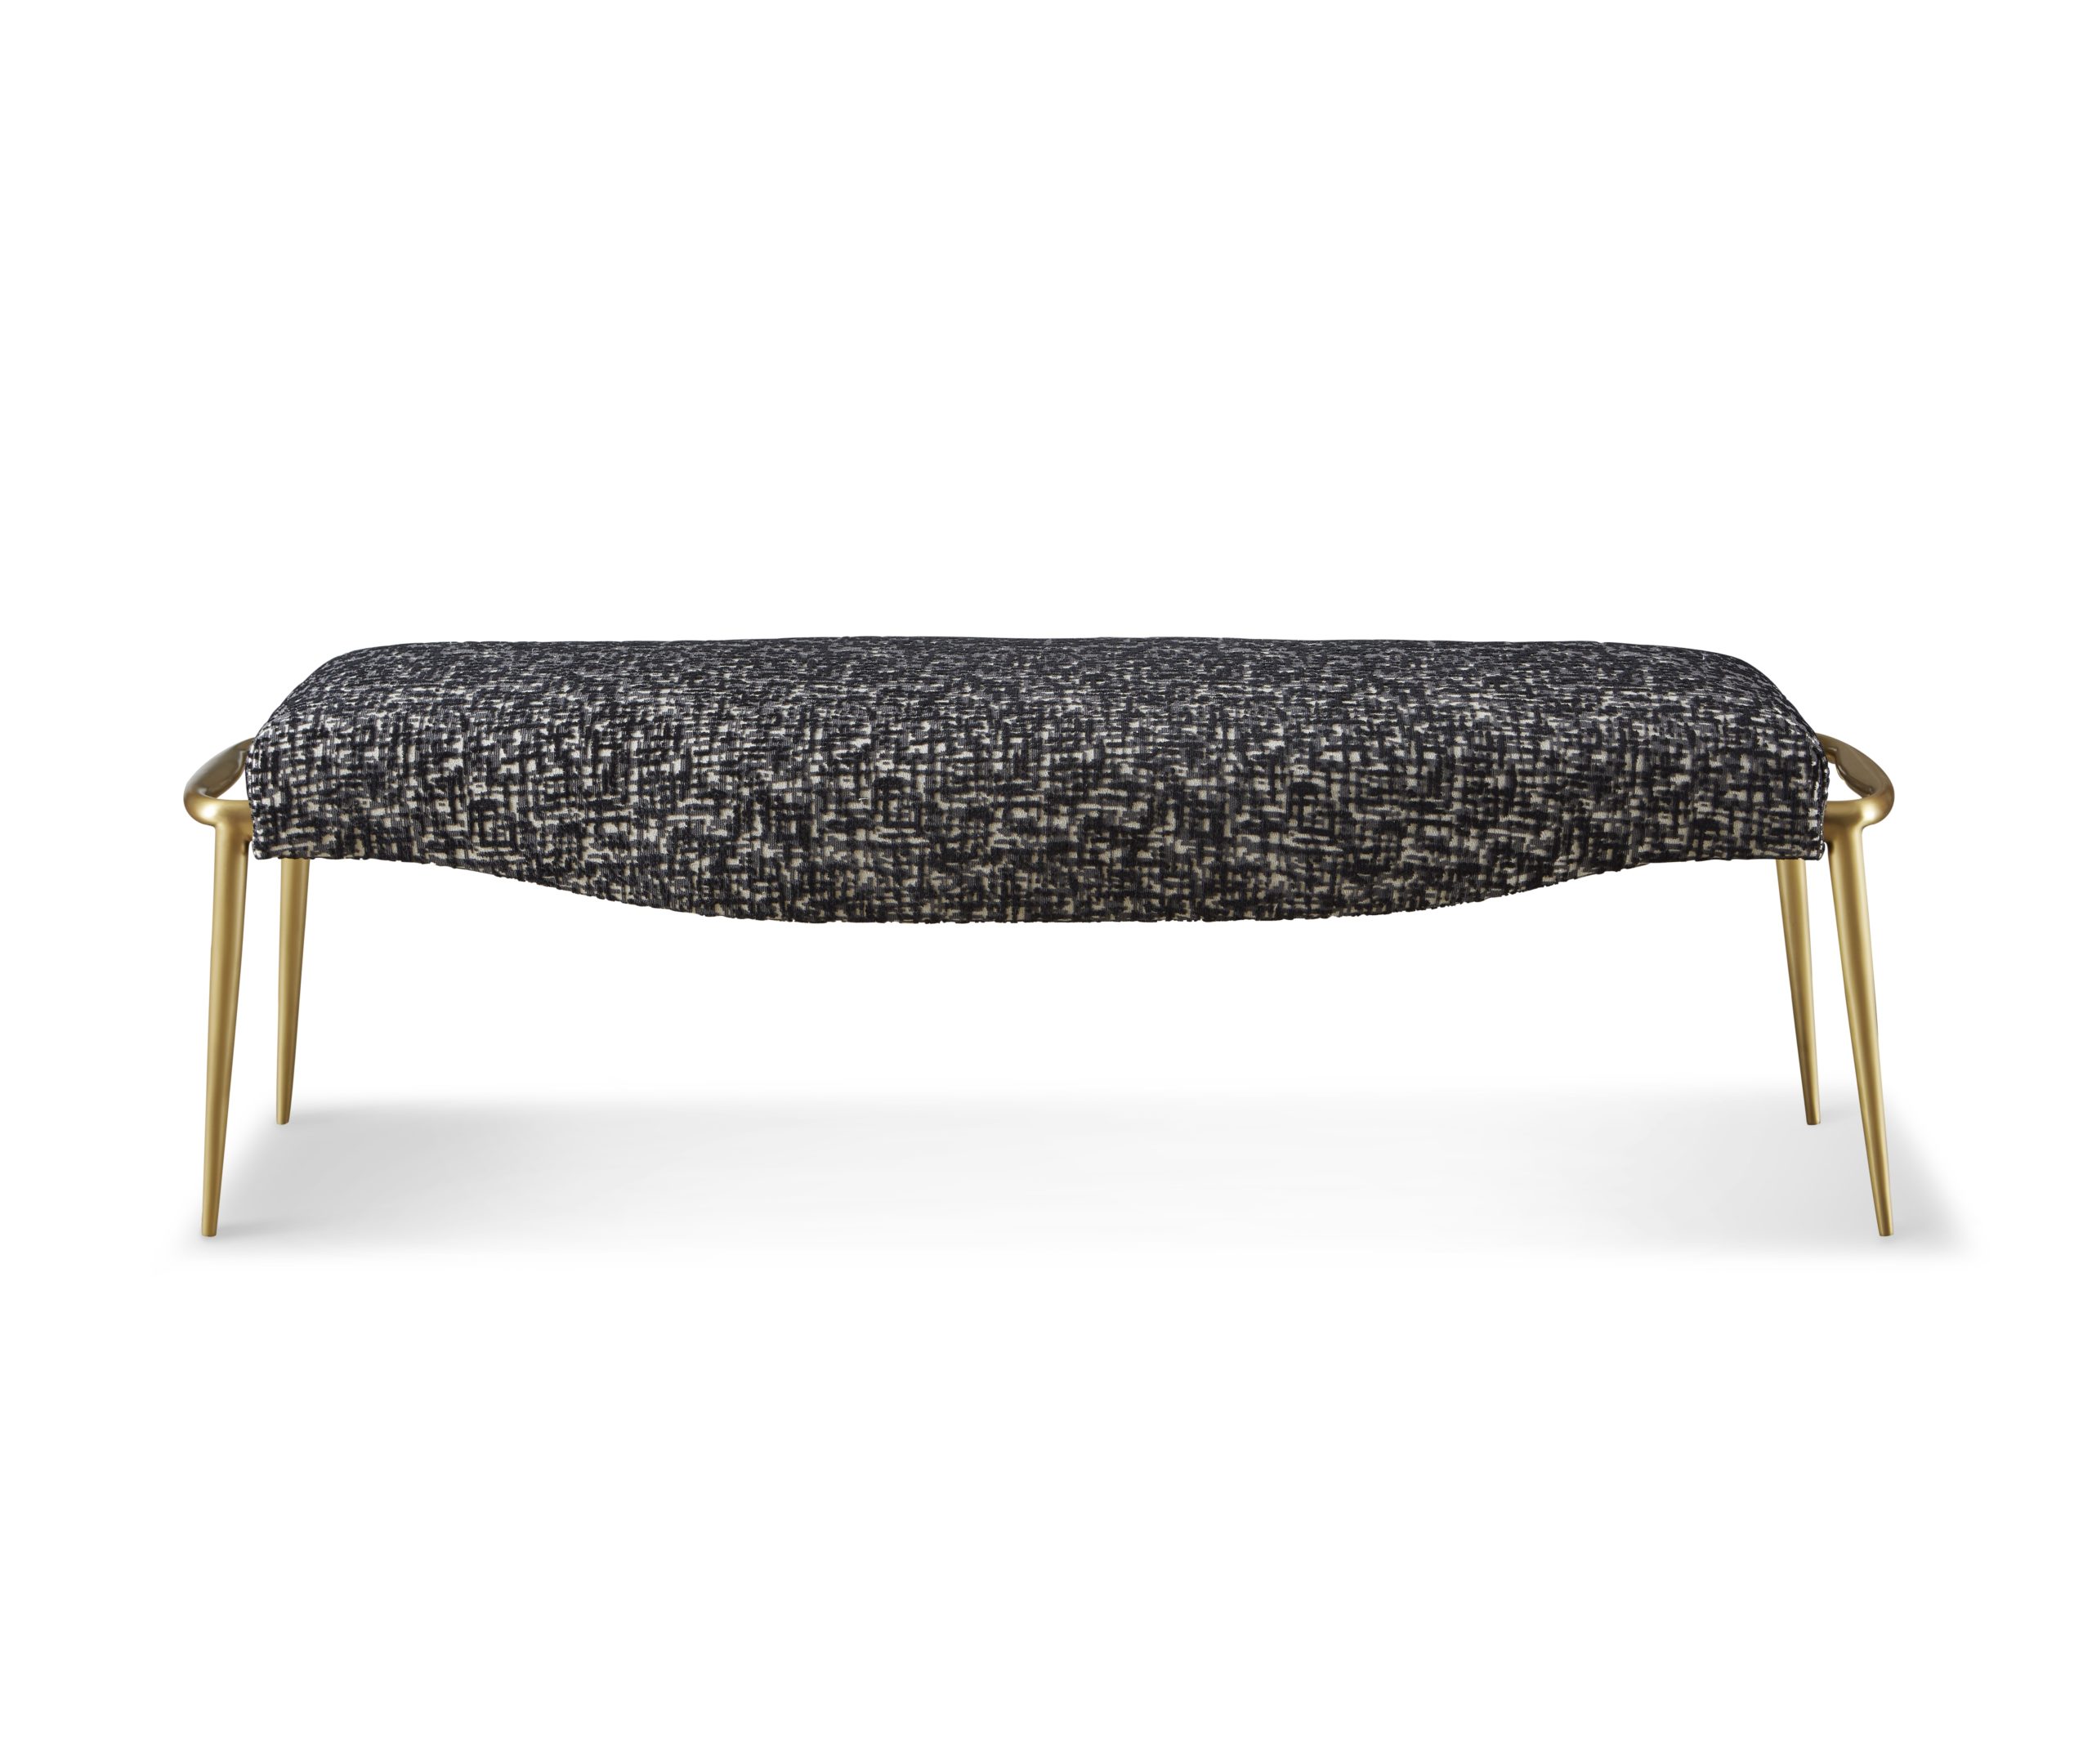 Baker_products_WNWN_vogue_bench_BAA3016_FRONT-scaled-1